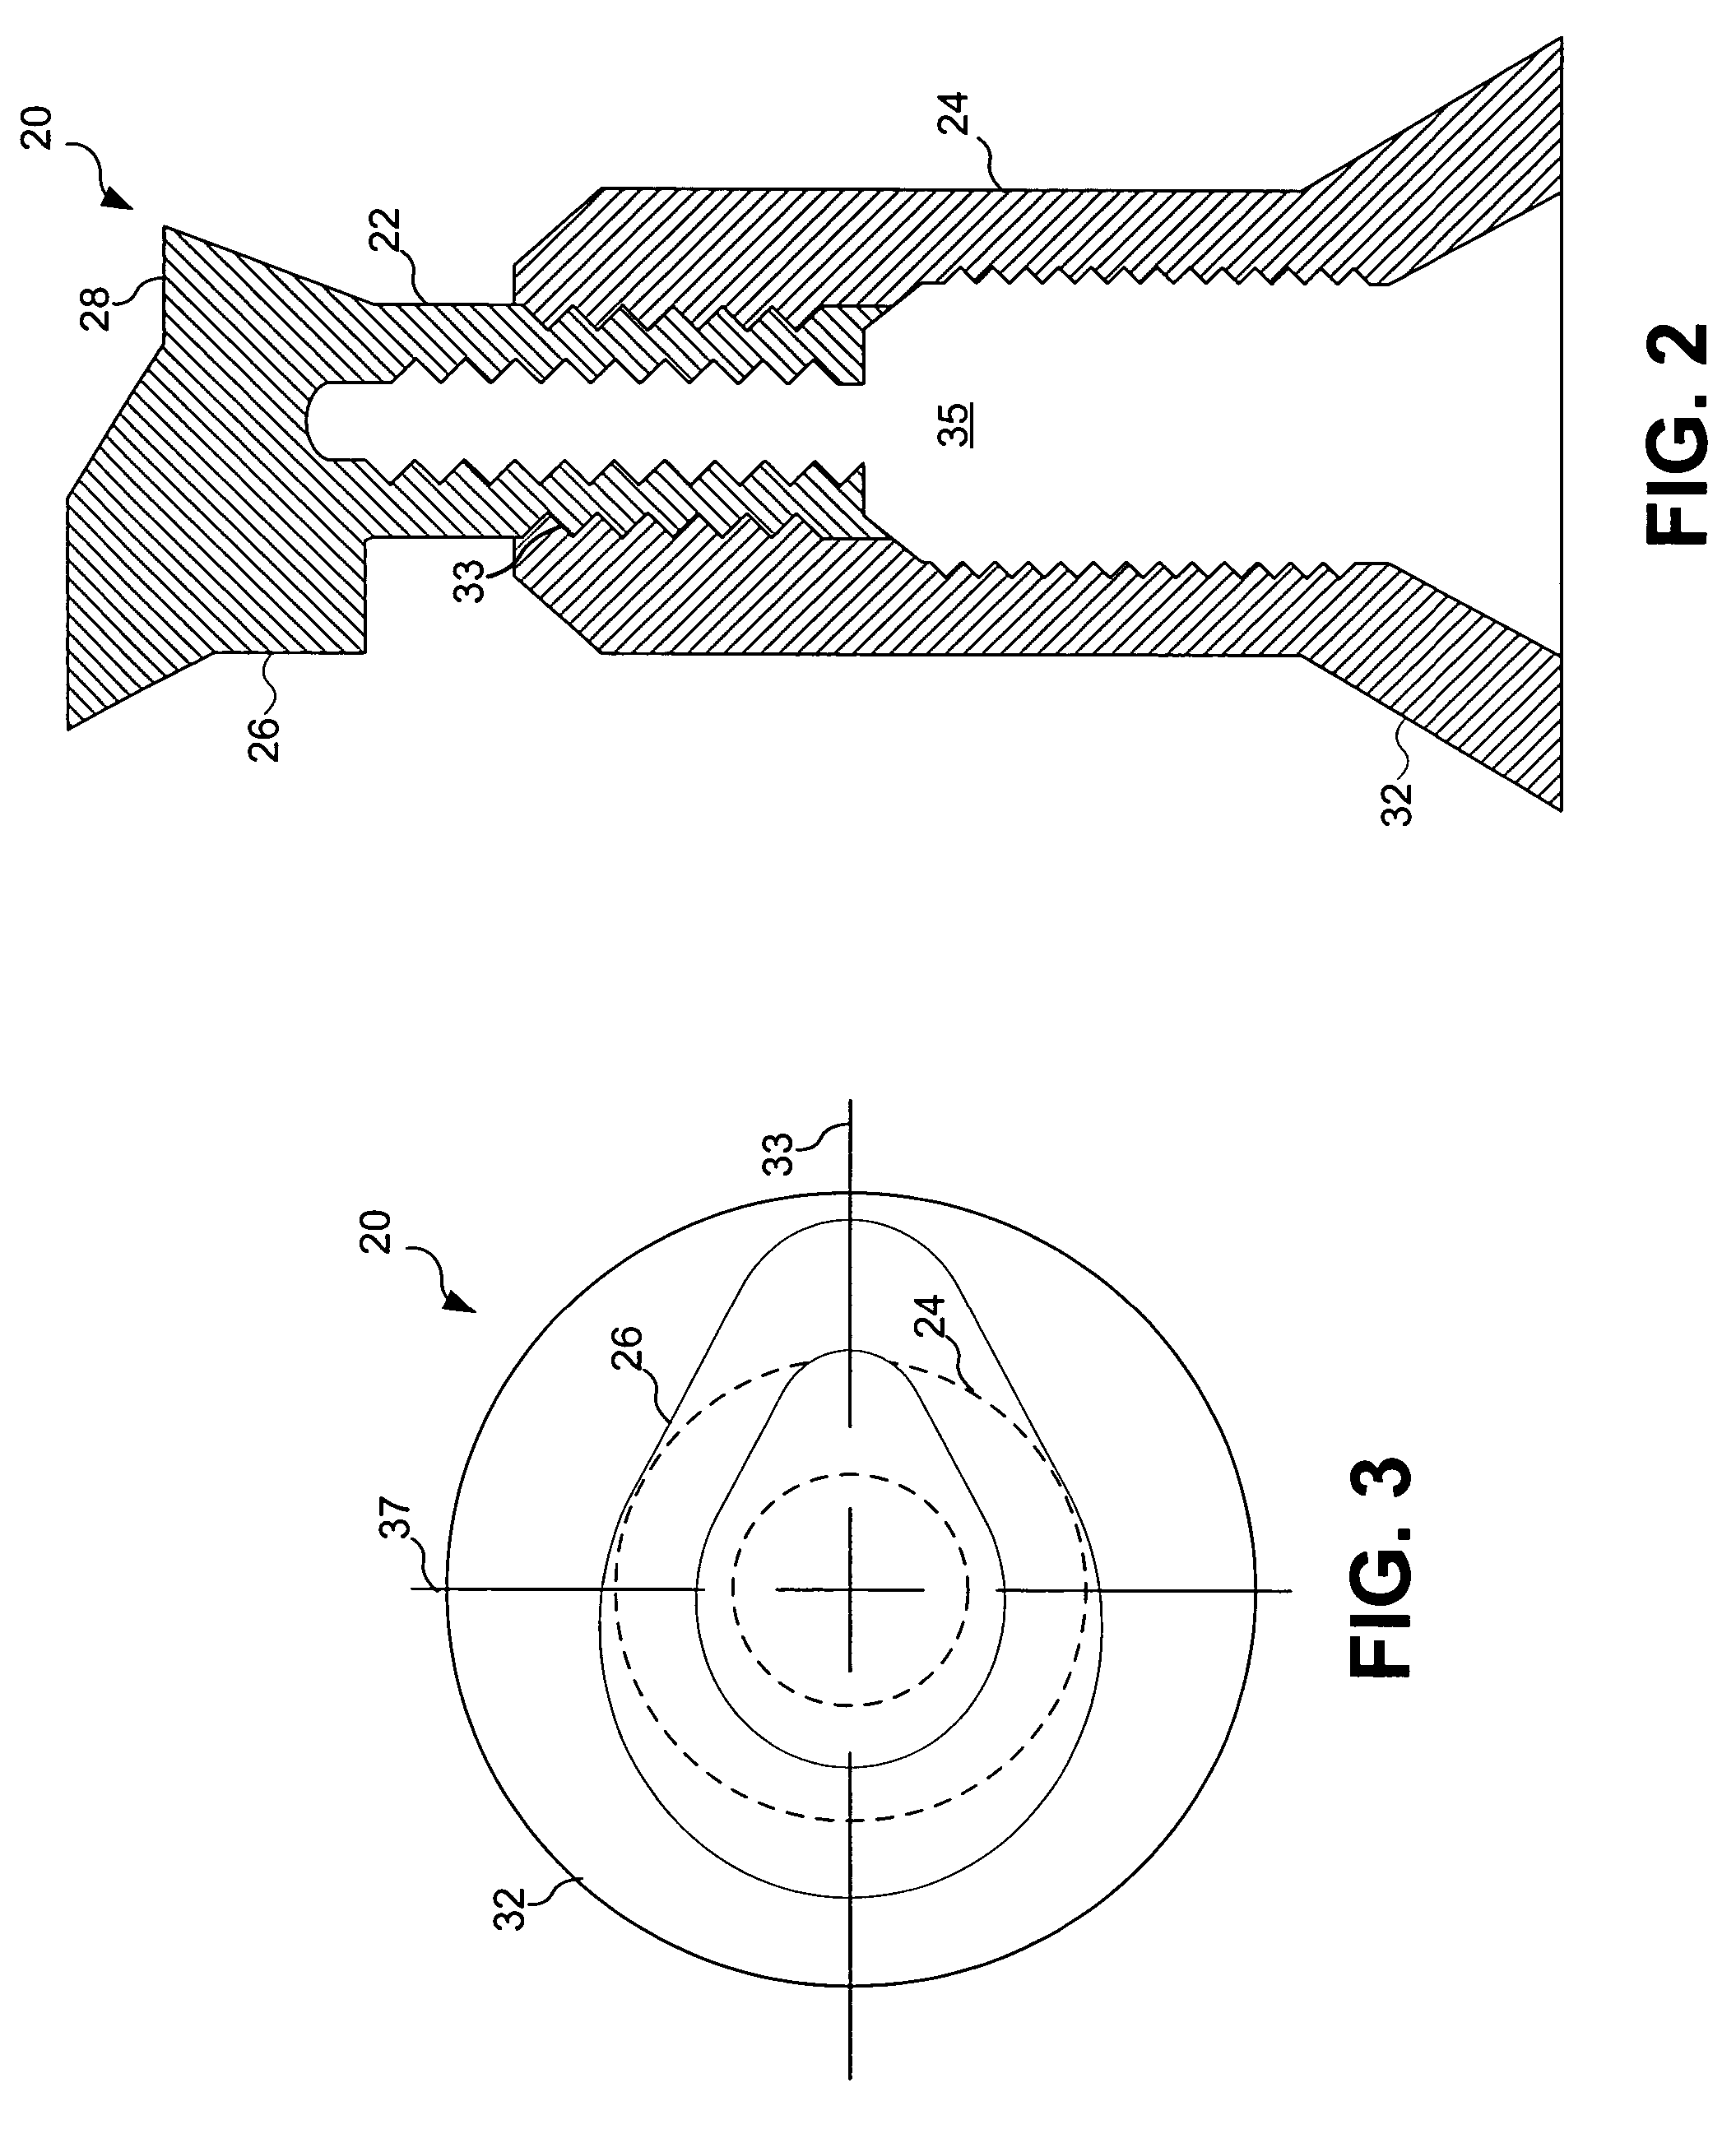 Non-threaded structural insert for component attachment